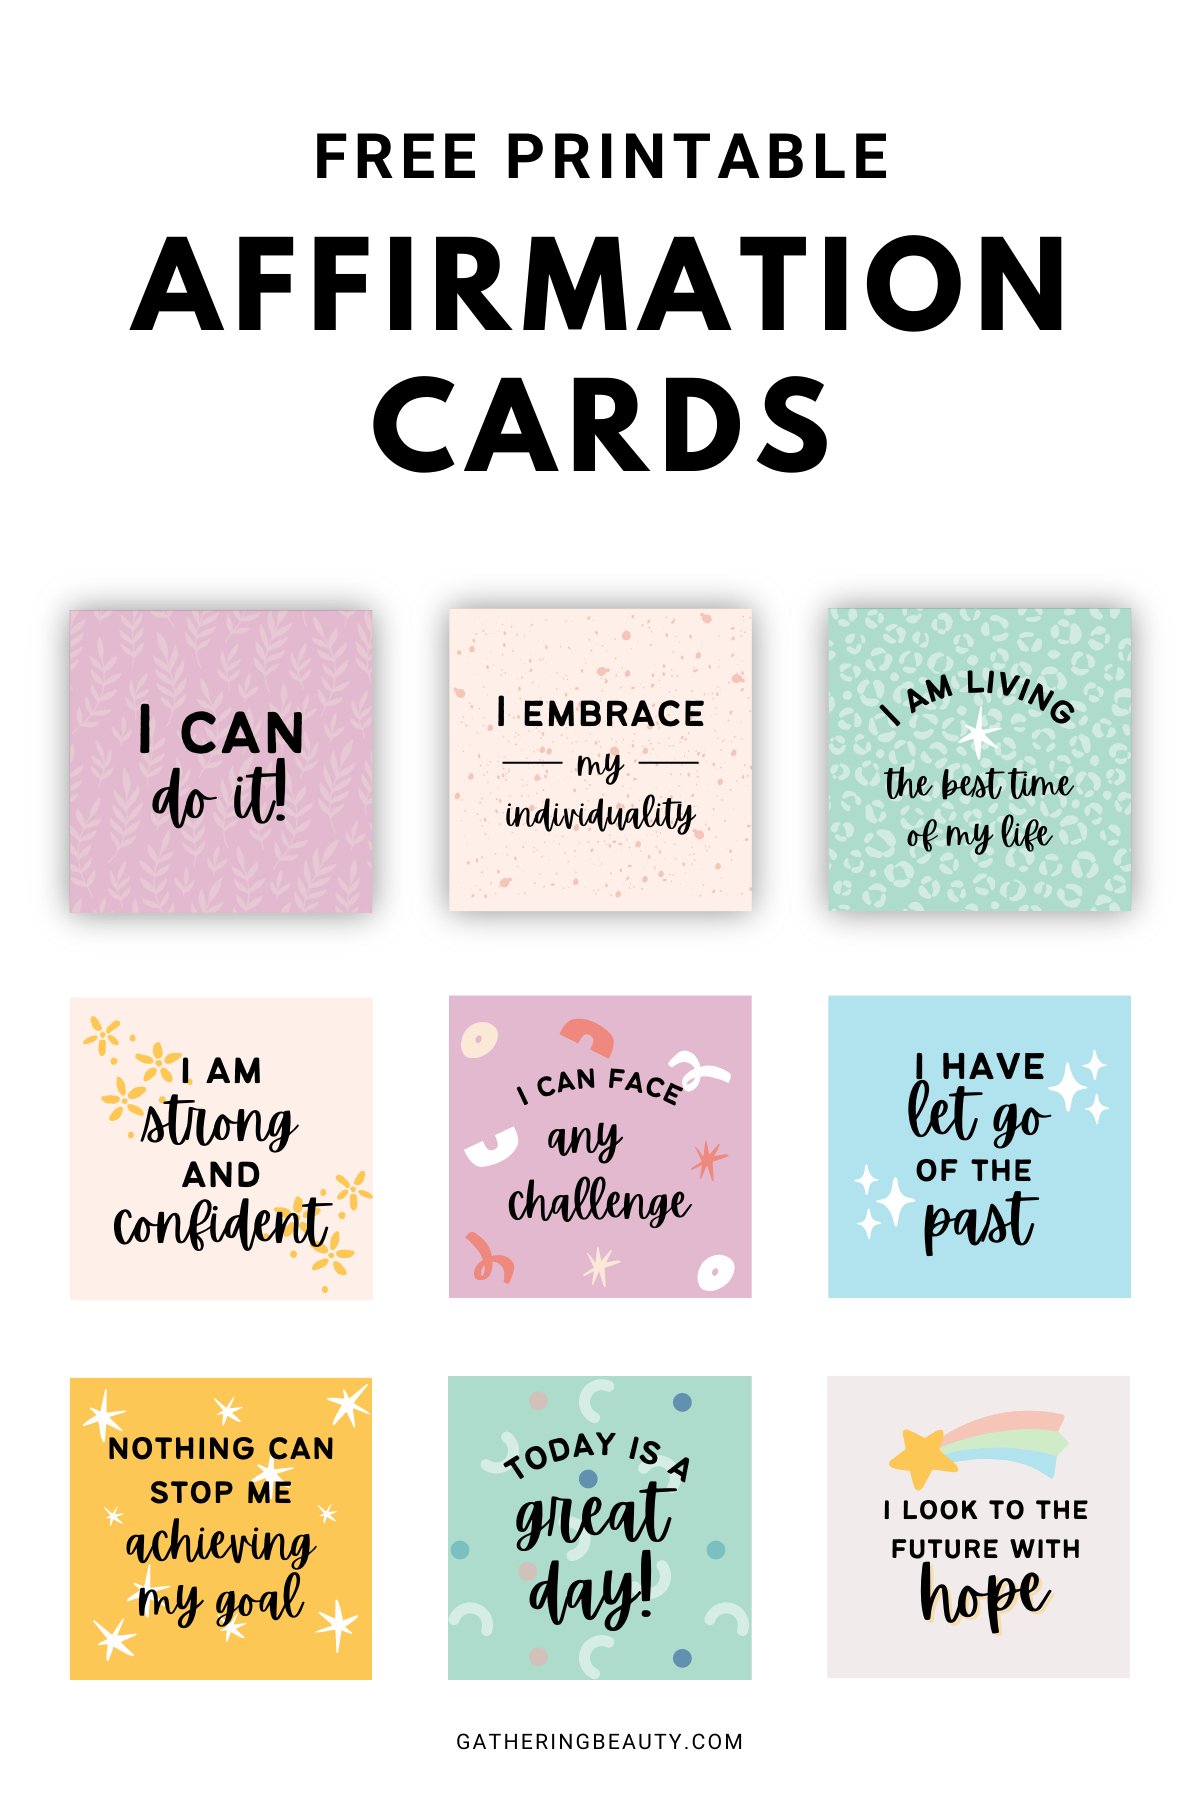 Affirmation Cards - Free Printable — Gathering Beauty